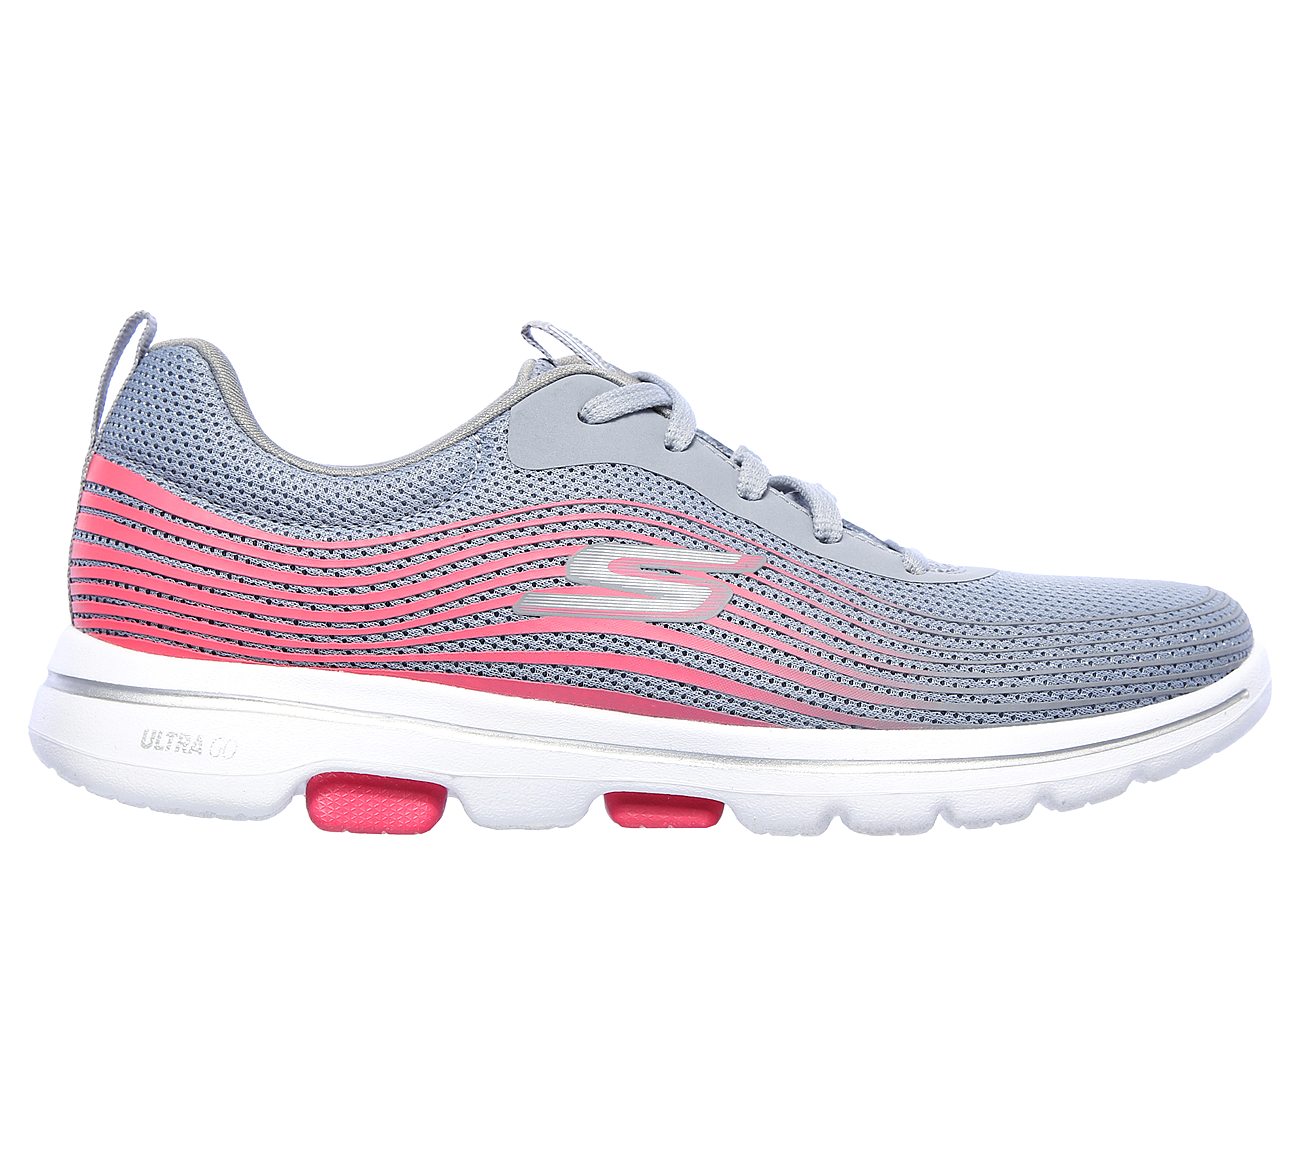 skechers on the go gris